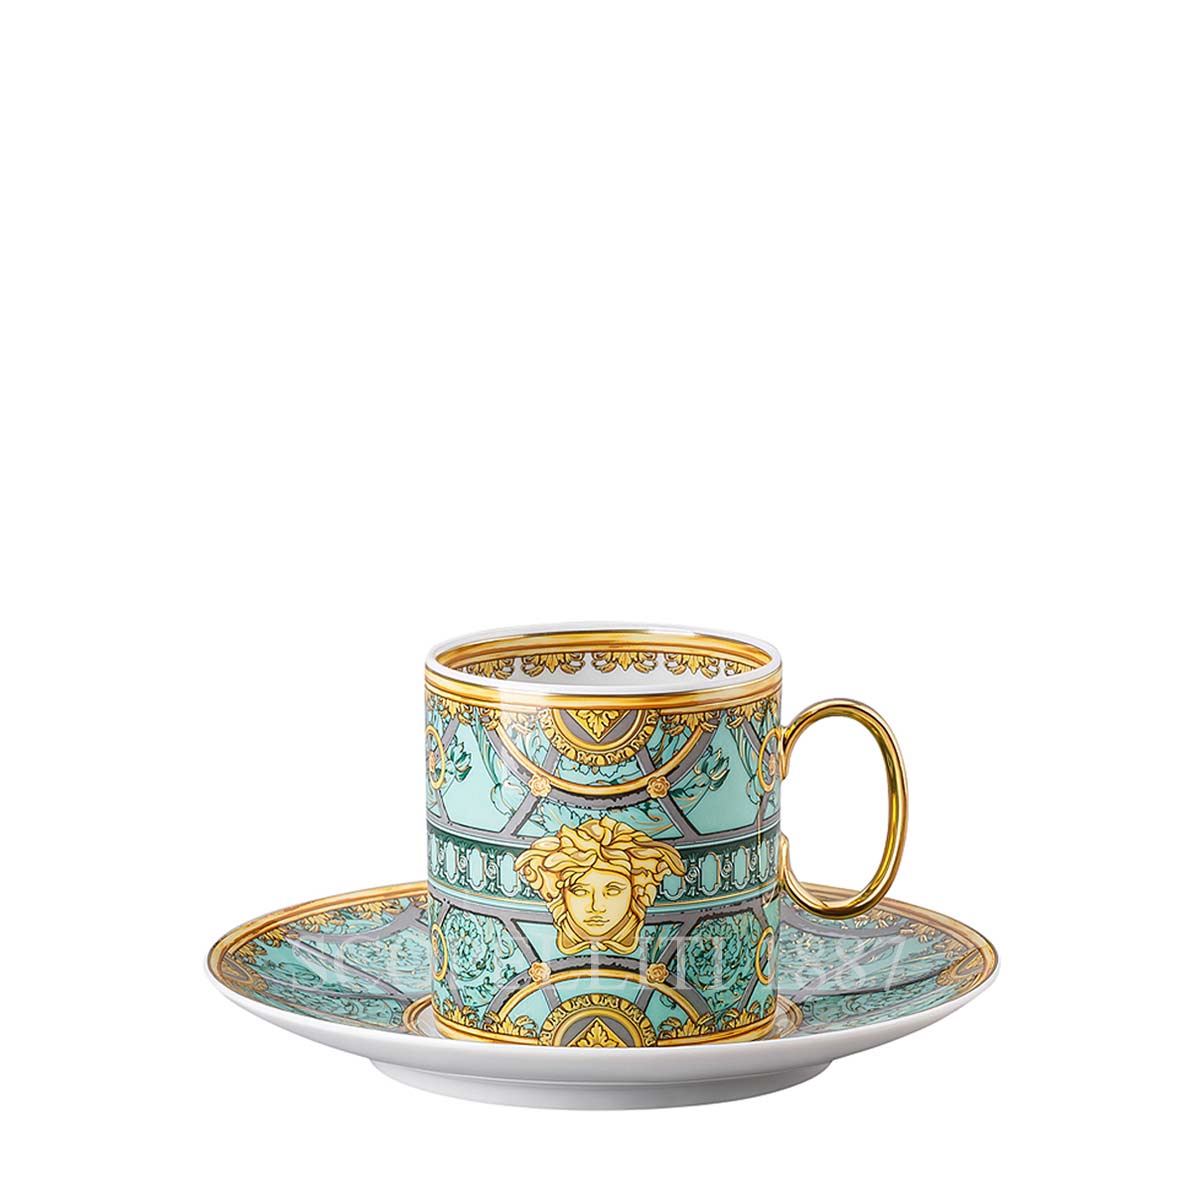 BUCCELLATI Porcelain Set of Two Espresso Cups and Saucers for Men